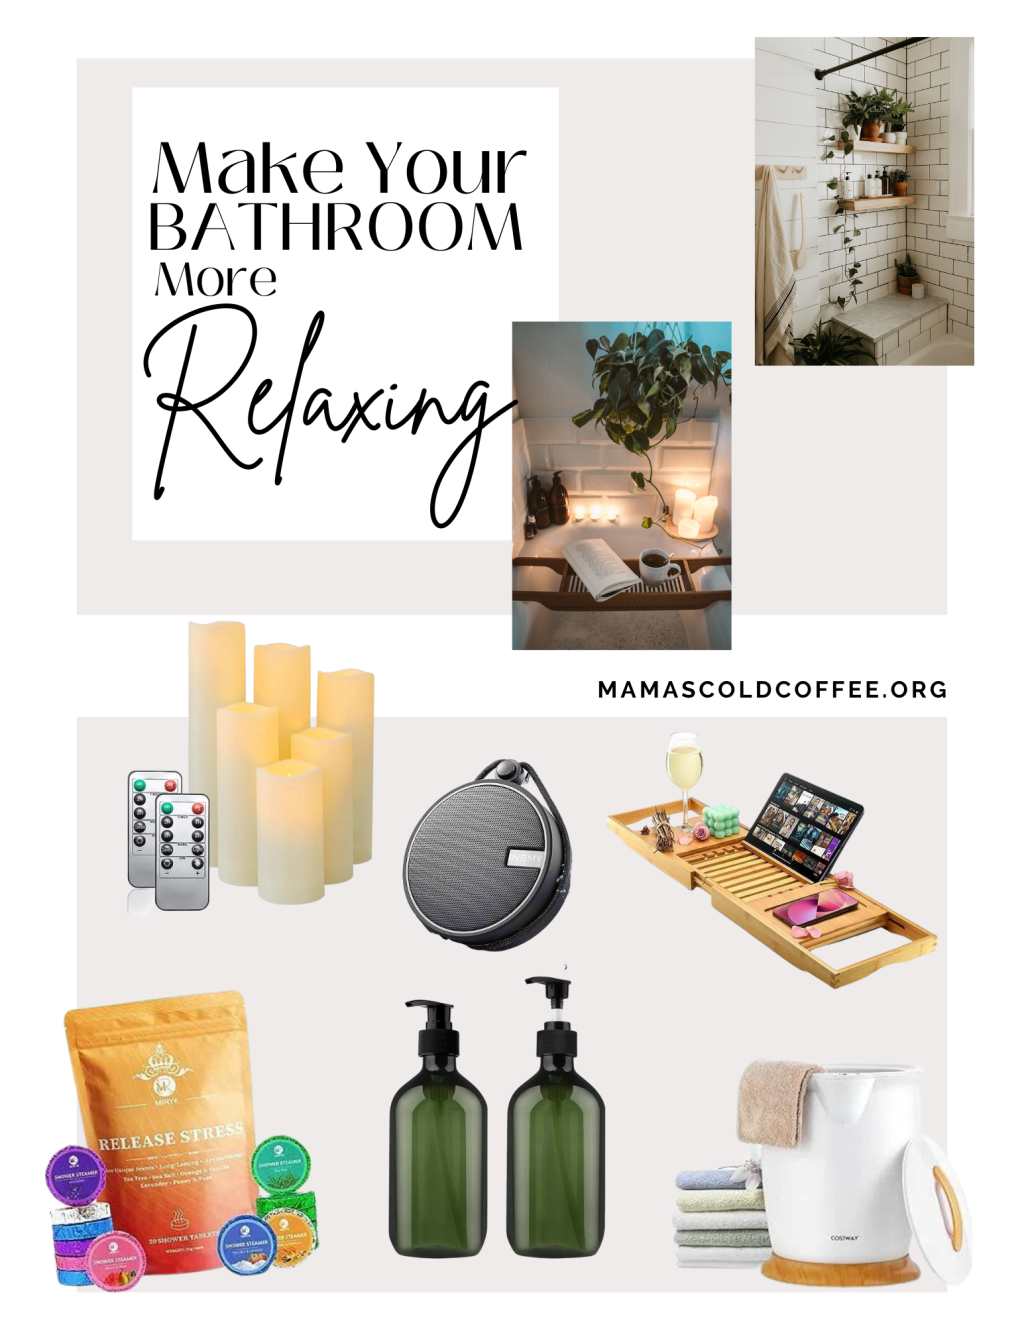 Make your Bathroom More Relaxing